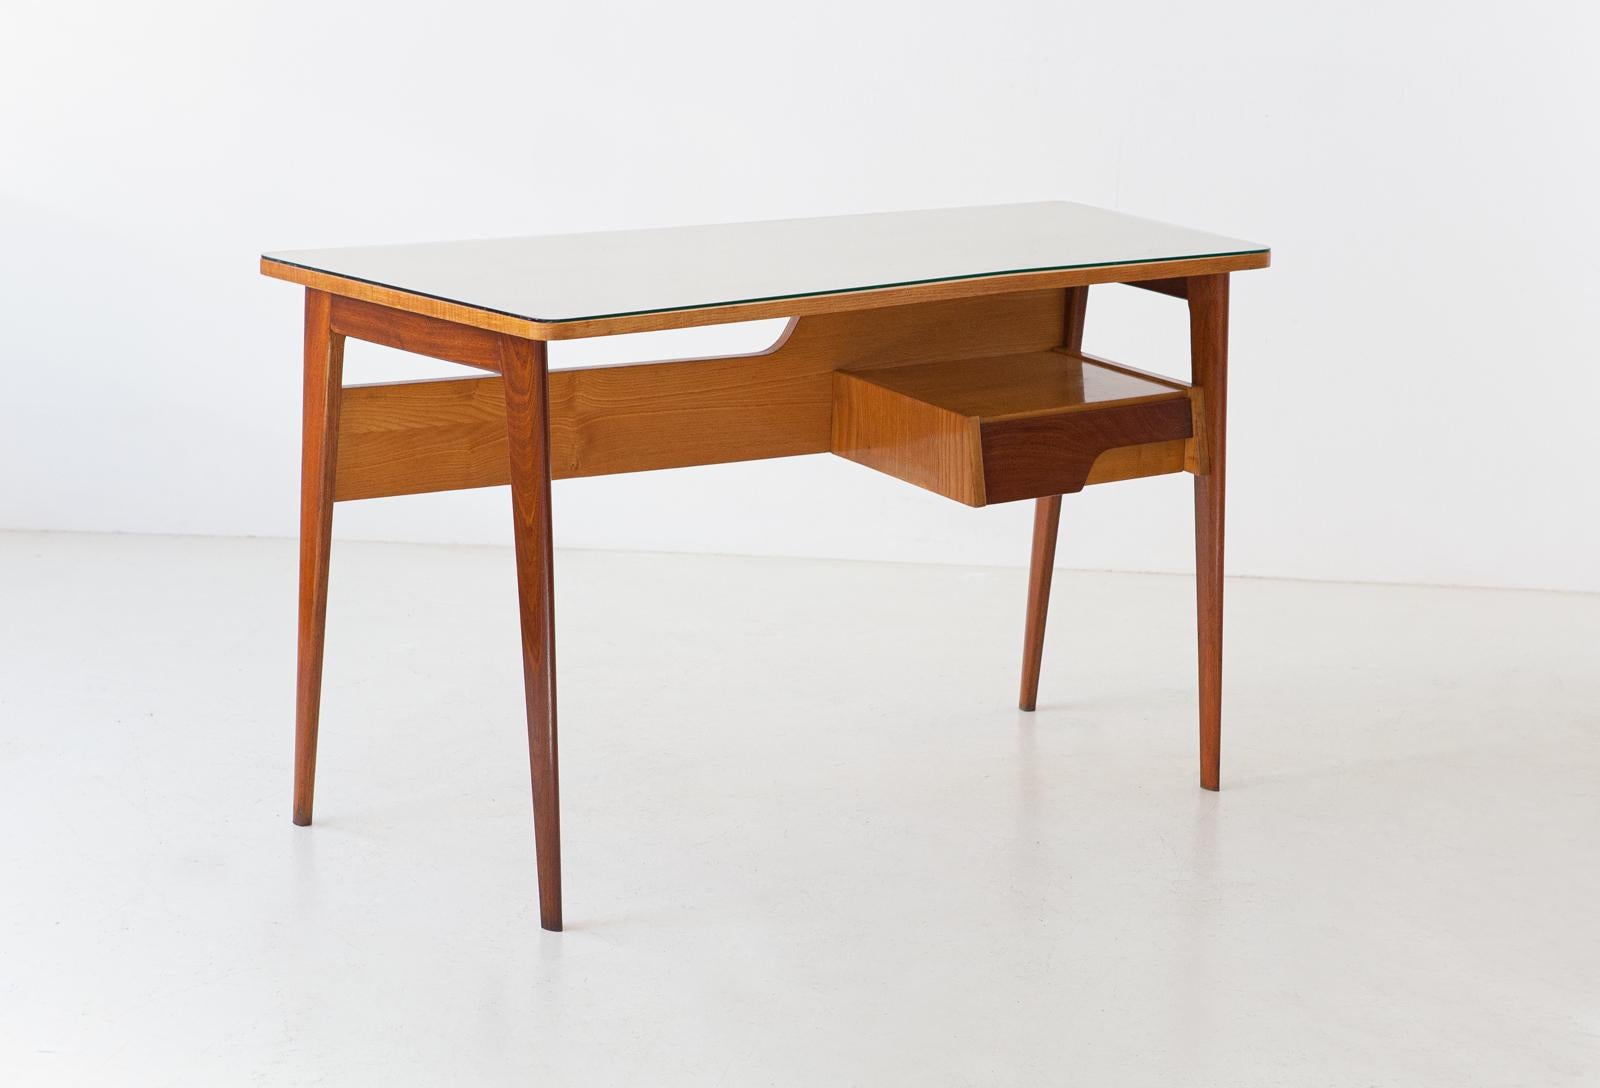 Mid-20th Century 1950s Italian Desk Table in Mahogany and Oakwood with Glass Top